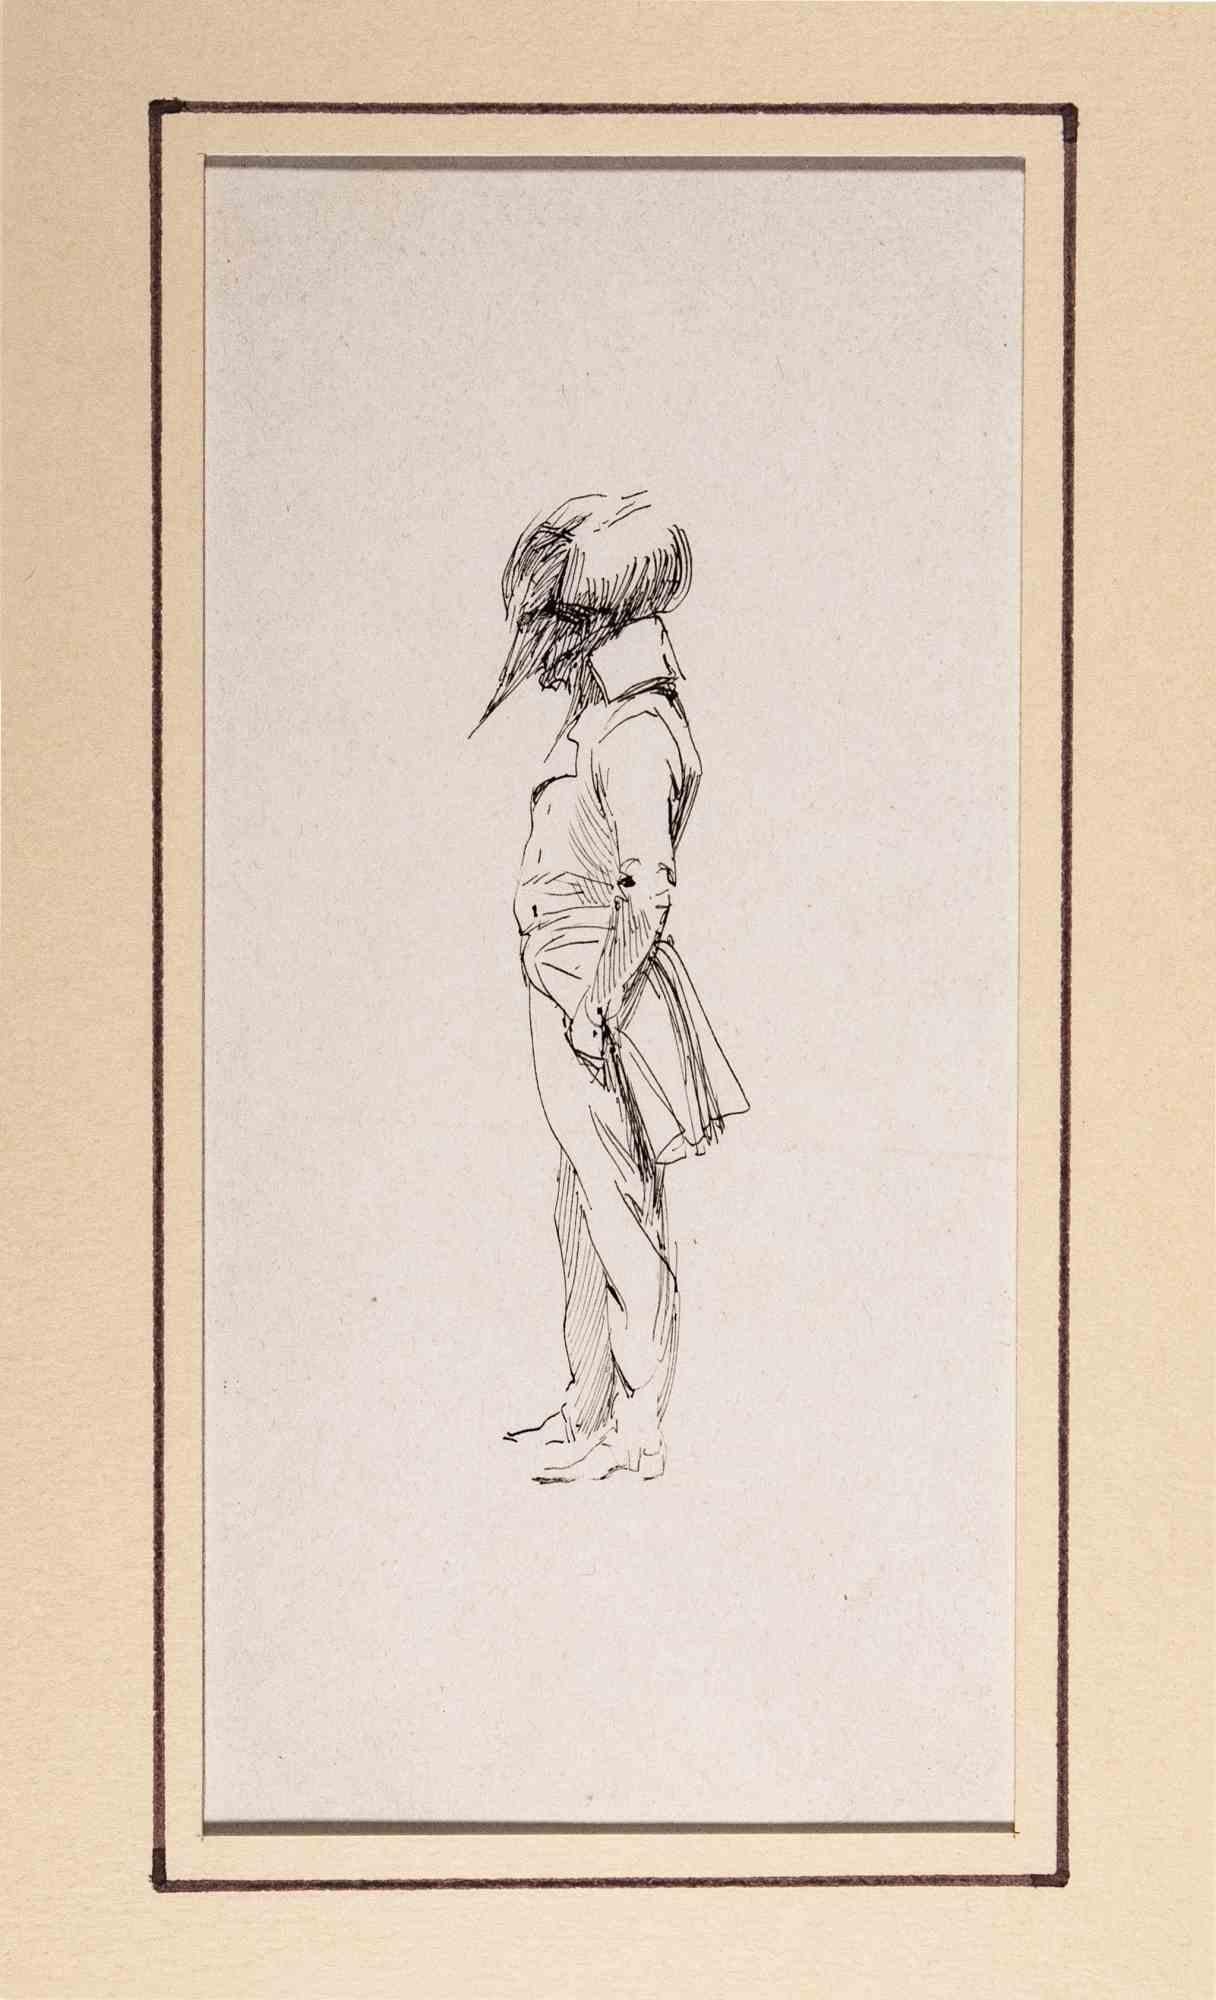 Portrait of a Man - Original ink Drawing by Edouard Detaille - 19th Century